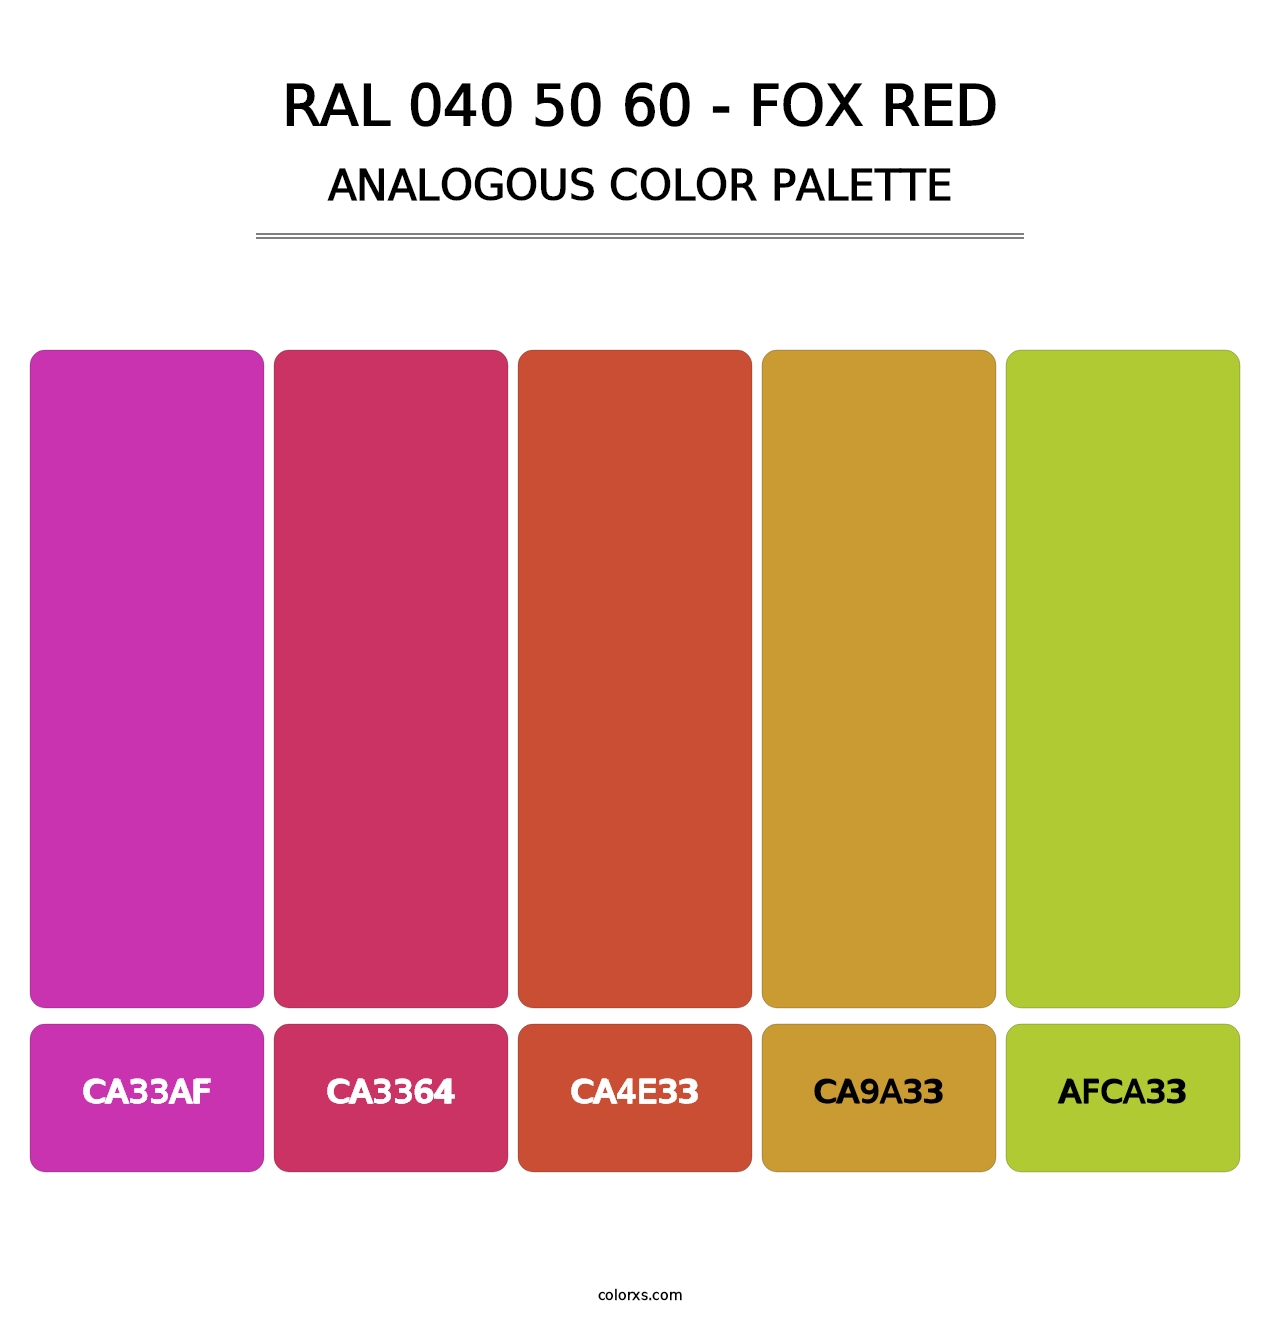 RAL 040 50 60 - Fox Red - Analogous Color Palette